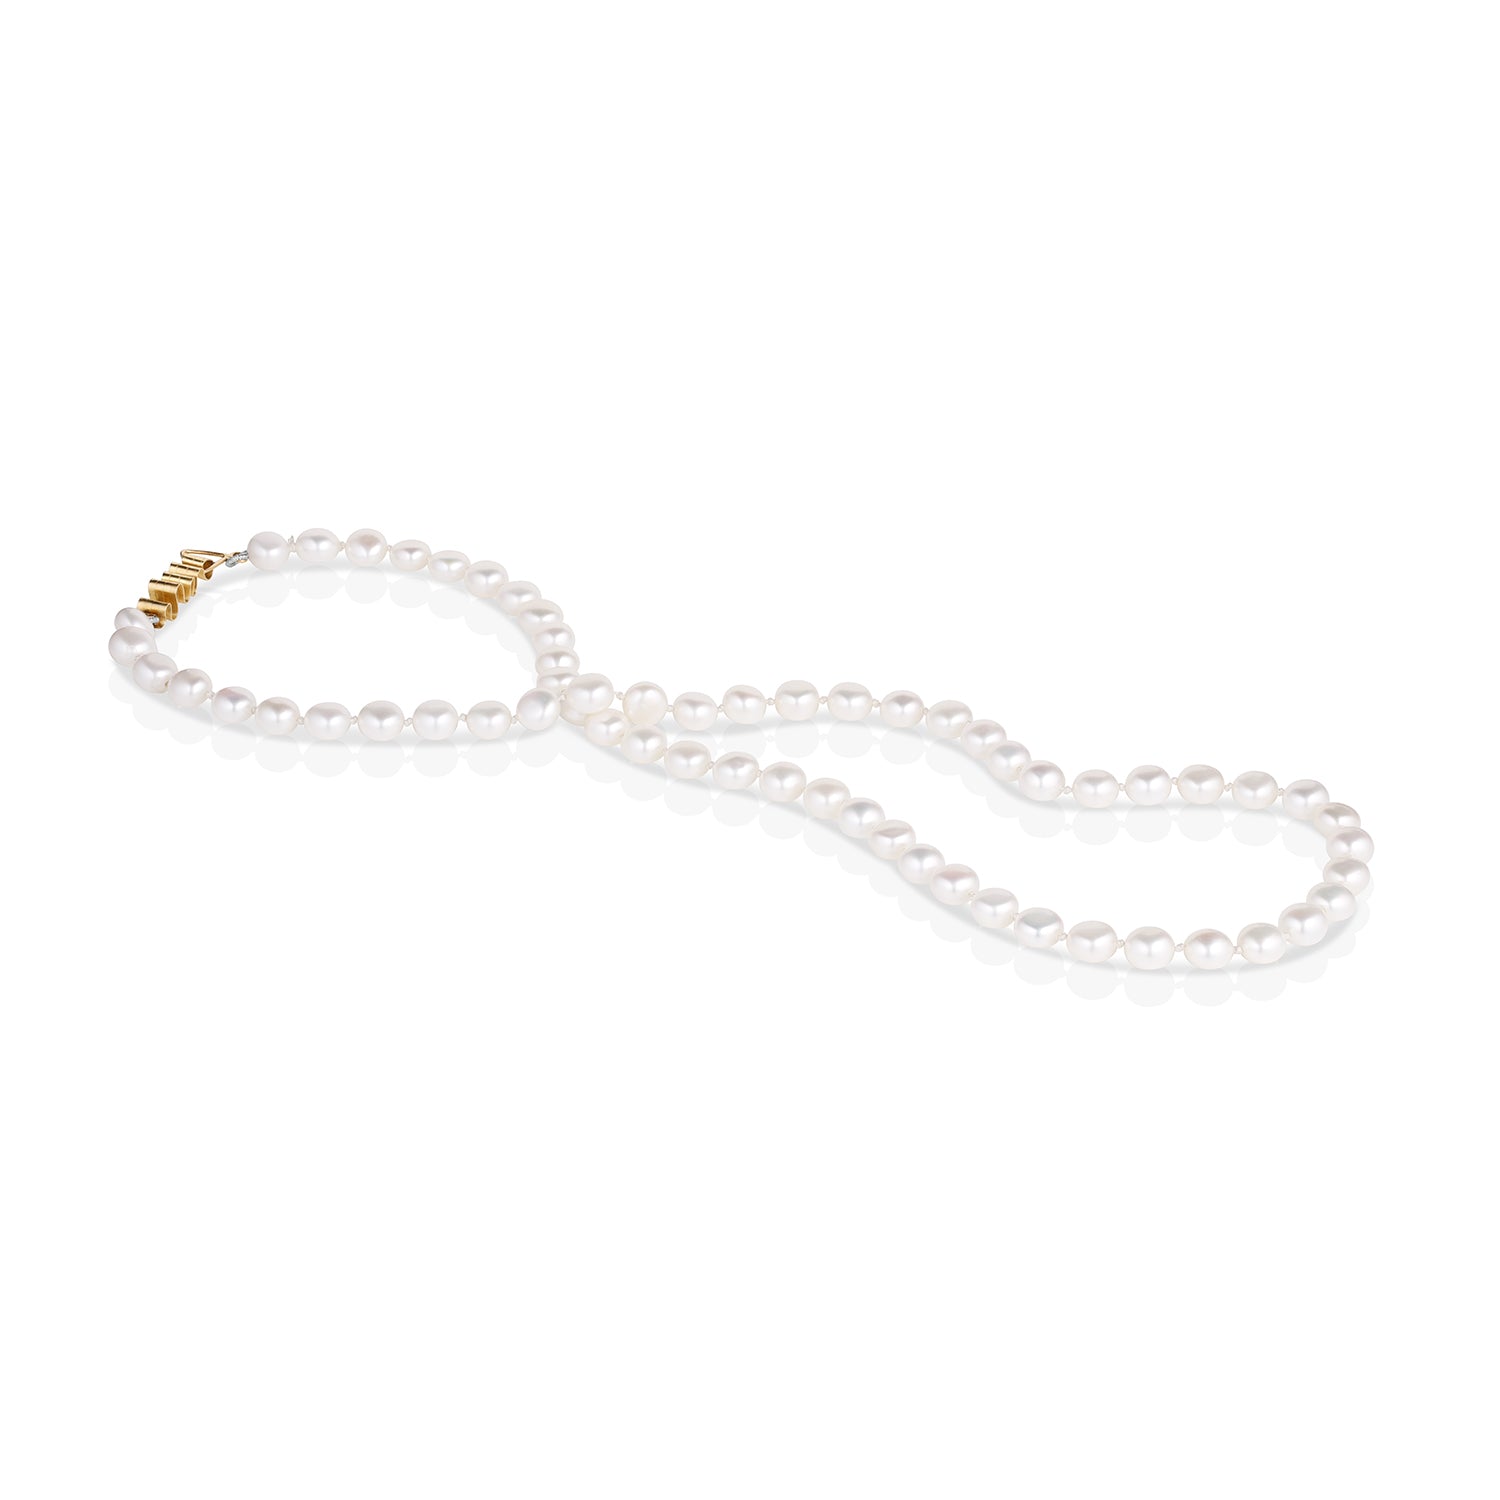 Strand of Puff Pearls with 14K Ribbon Clasp